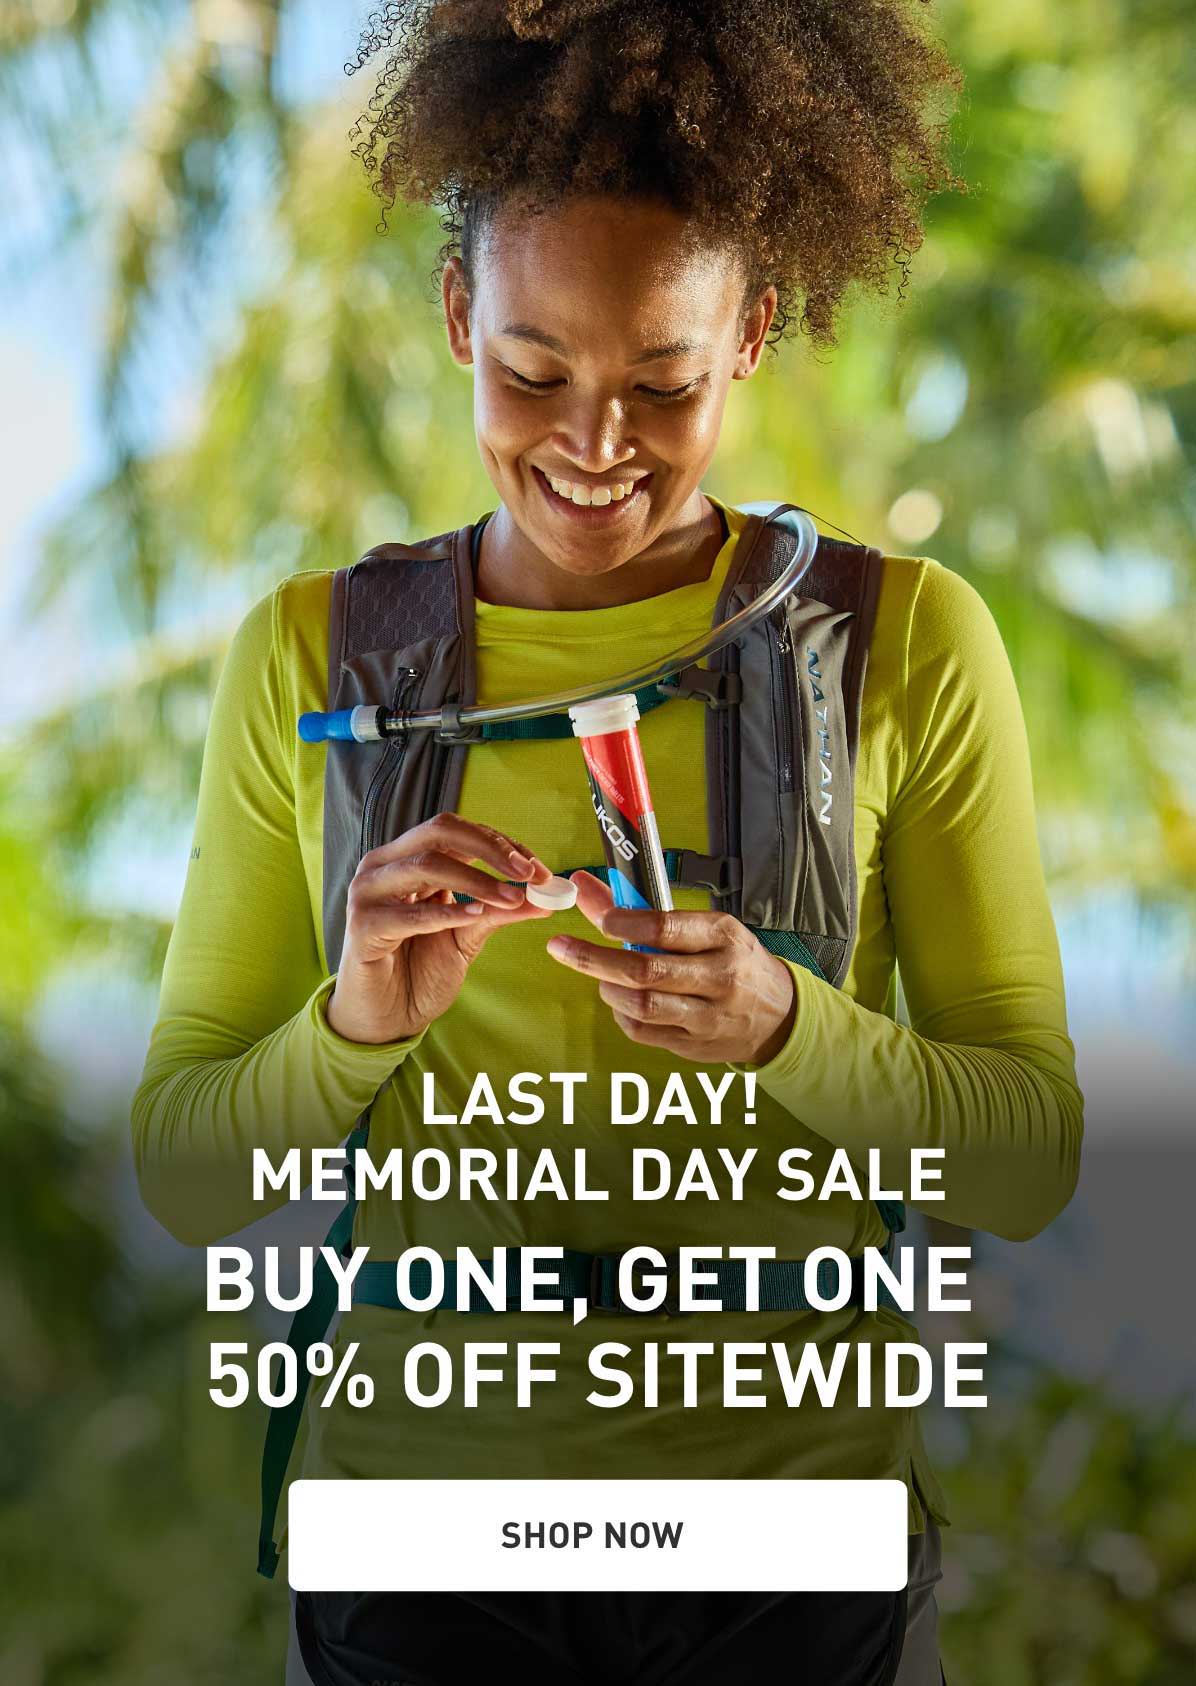 Last Day! Memorial Day Sale - Buy One, Get One 50% Off Sitewide - Shop Now